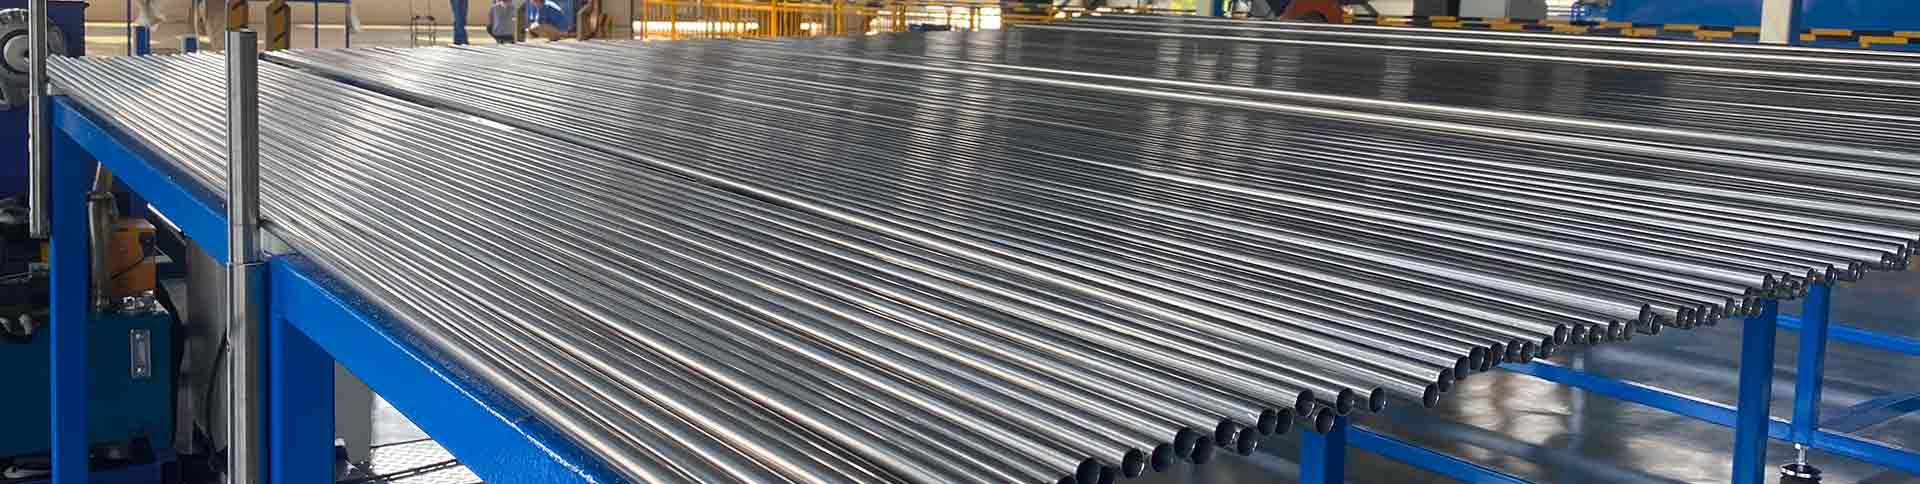 The Application Prospect of Stainless Steel Pipe